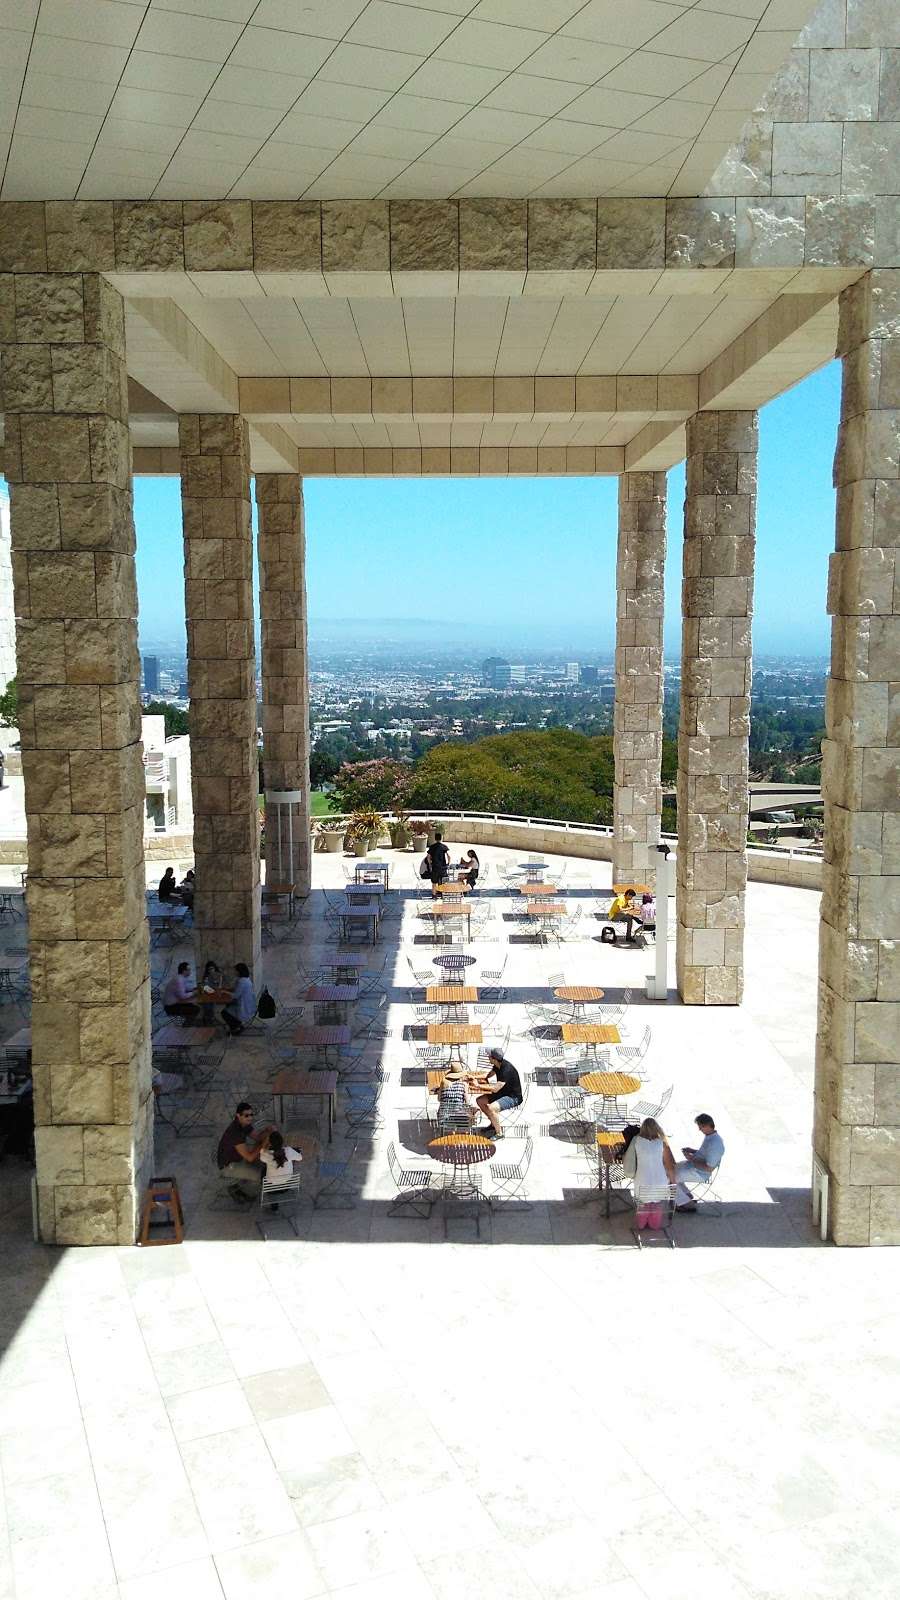 Garden Terrace Cafe | 1200 Getty Center Dr, Los Angeles, CA 90049 | Phone: (310) 440-7300